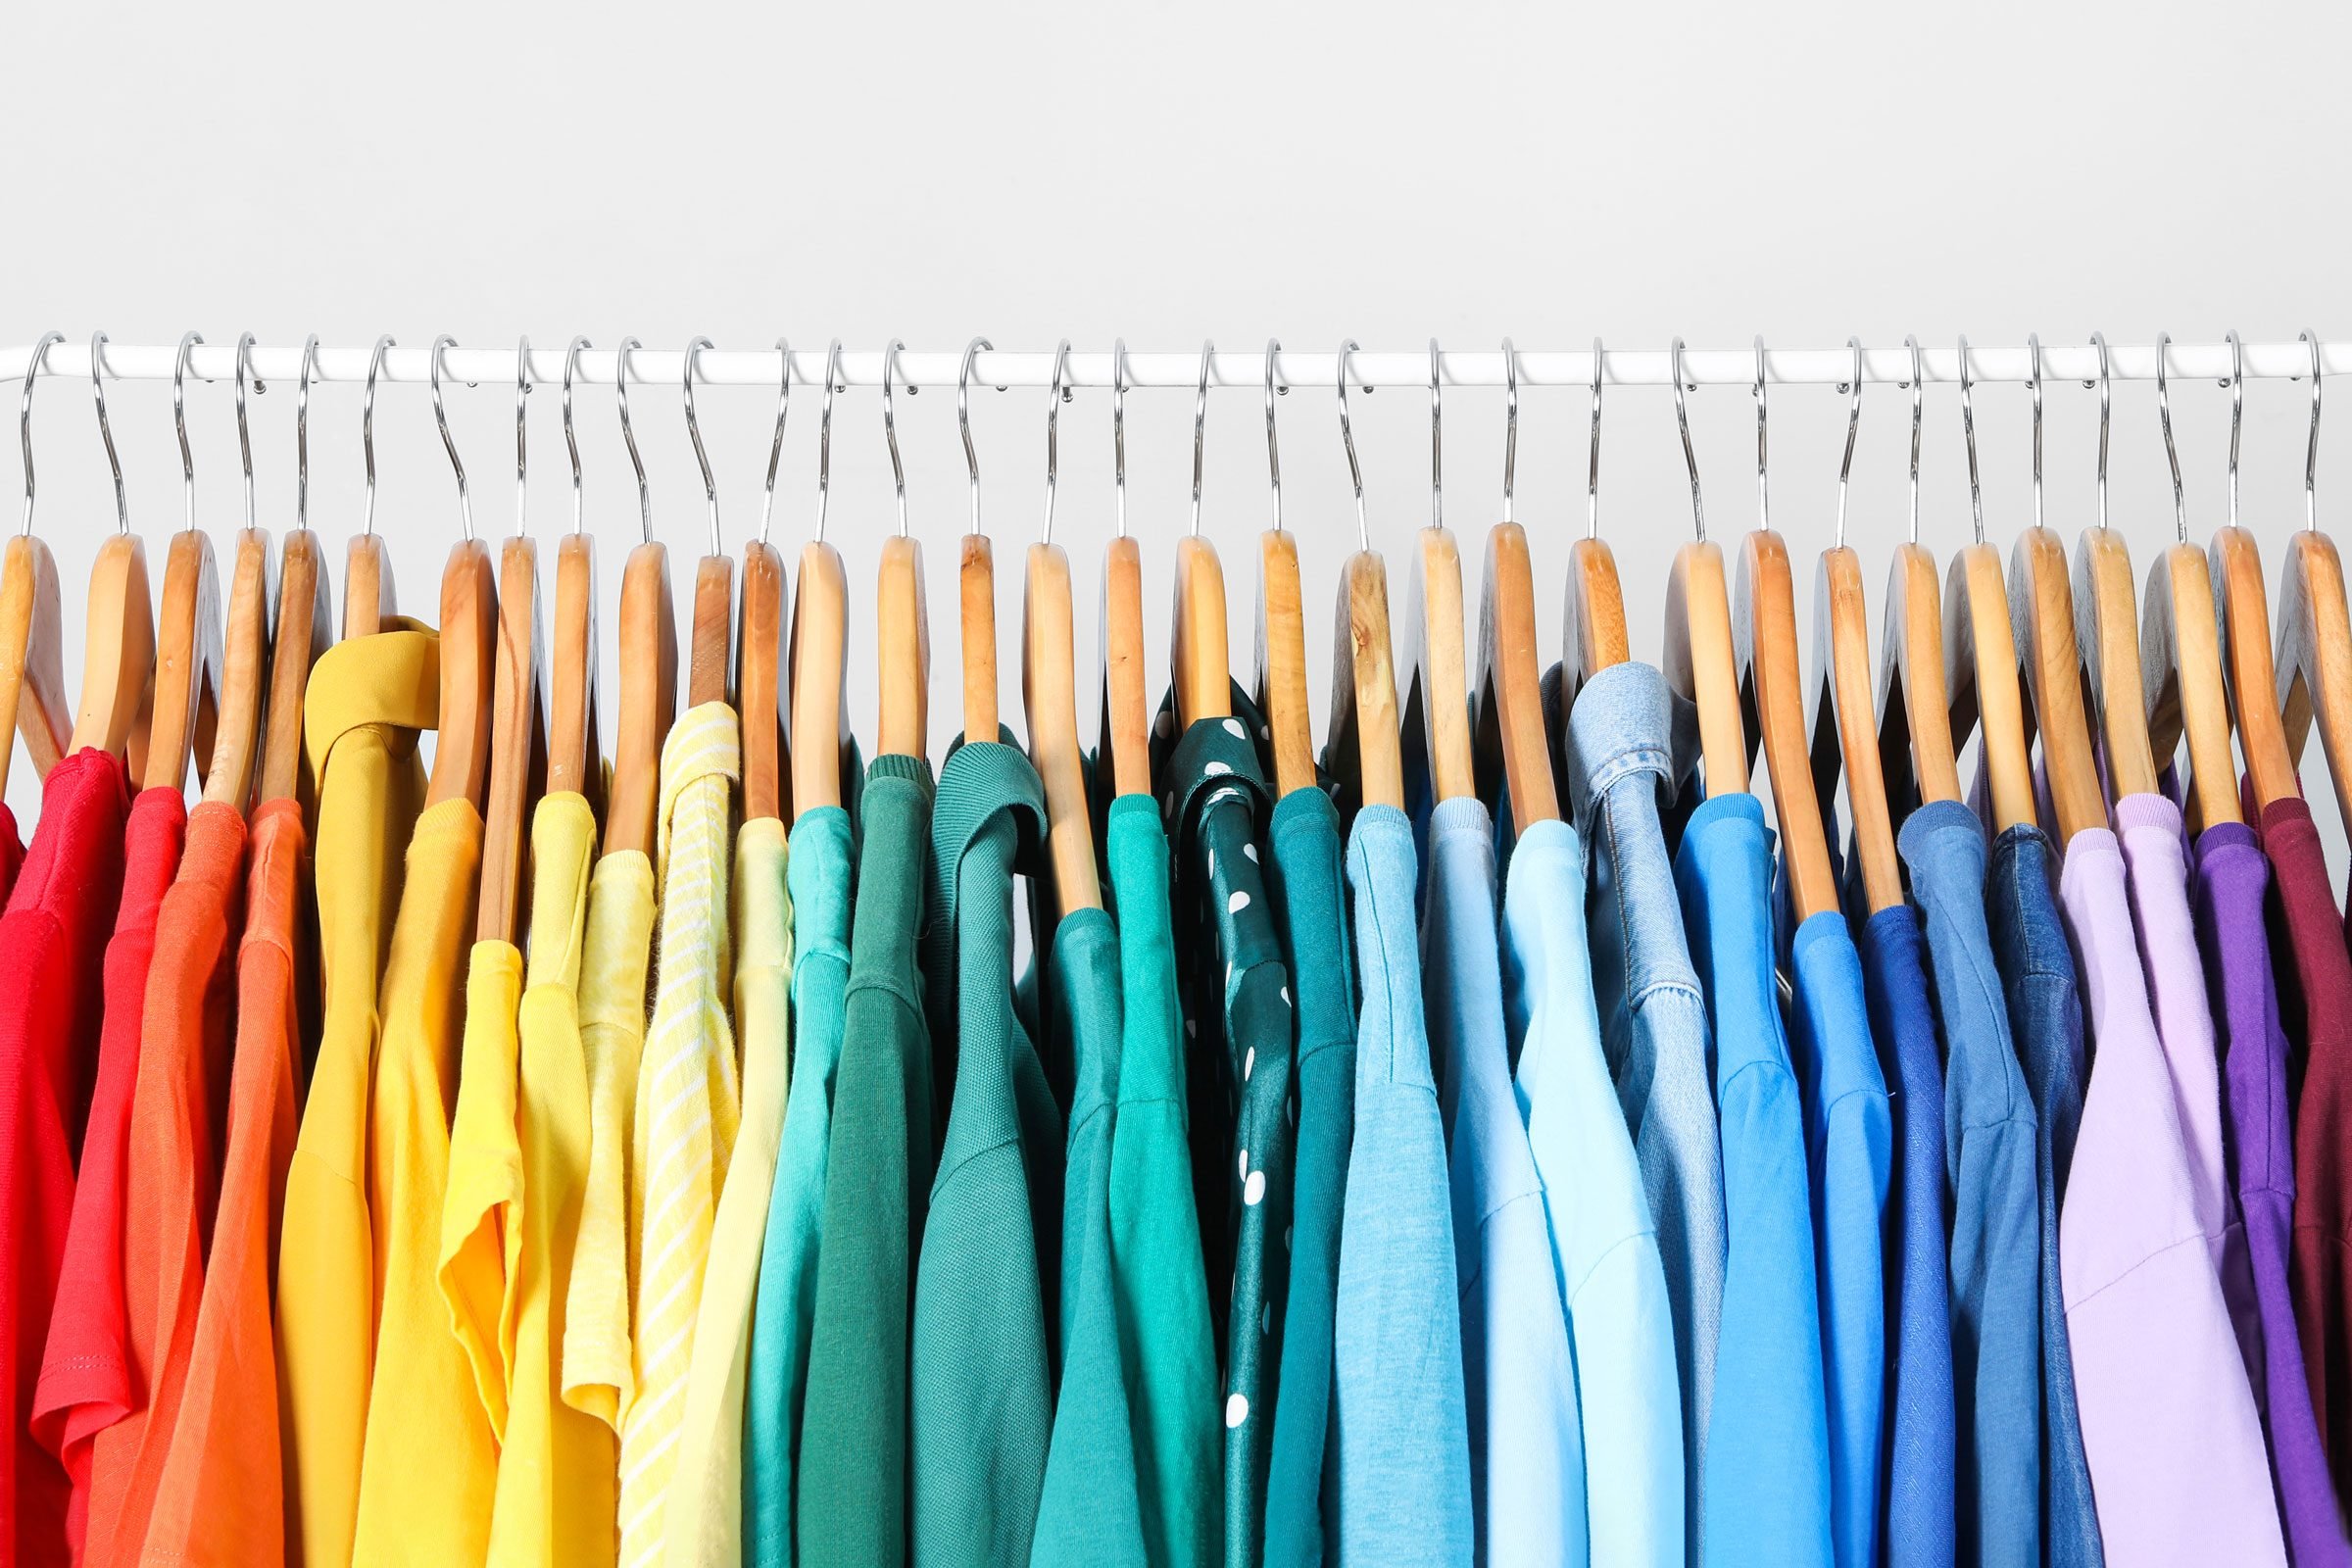 How to Clean Your Closet According to a Professional Organizer